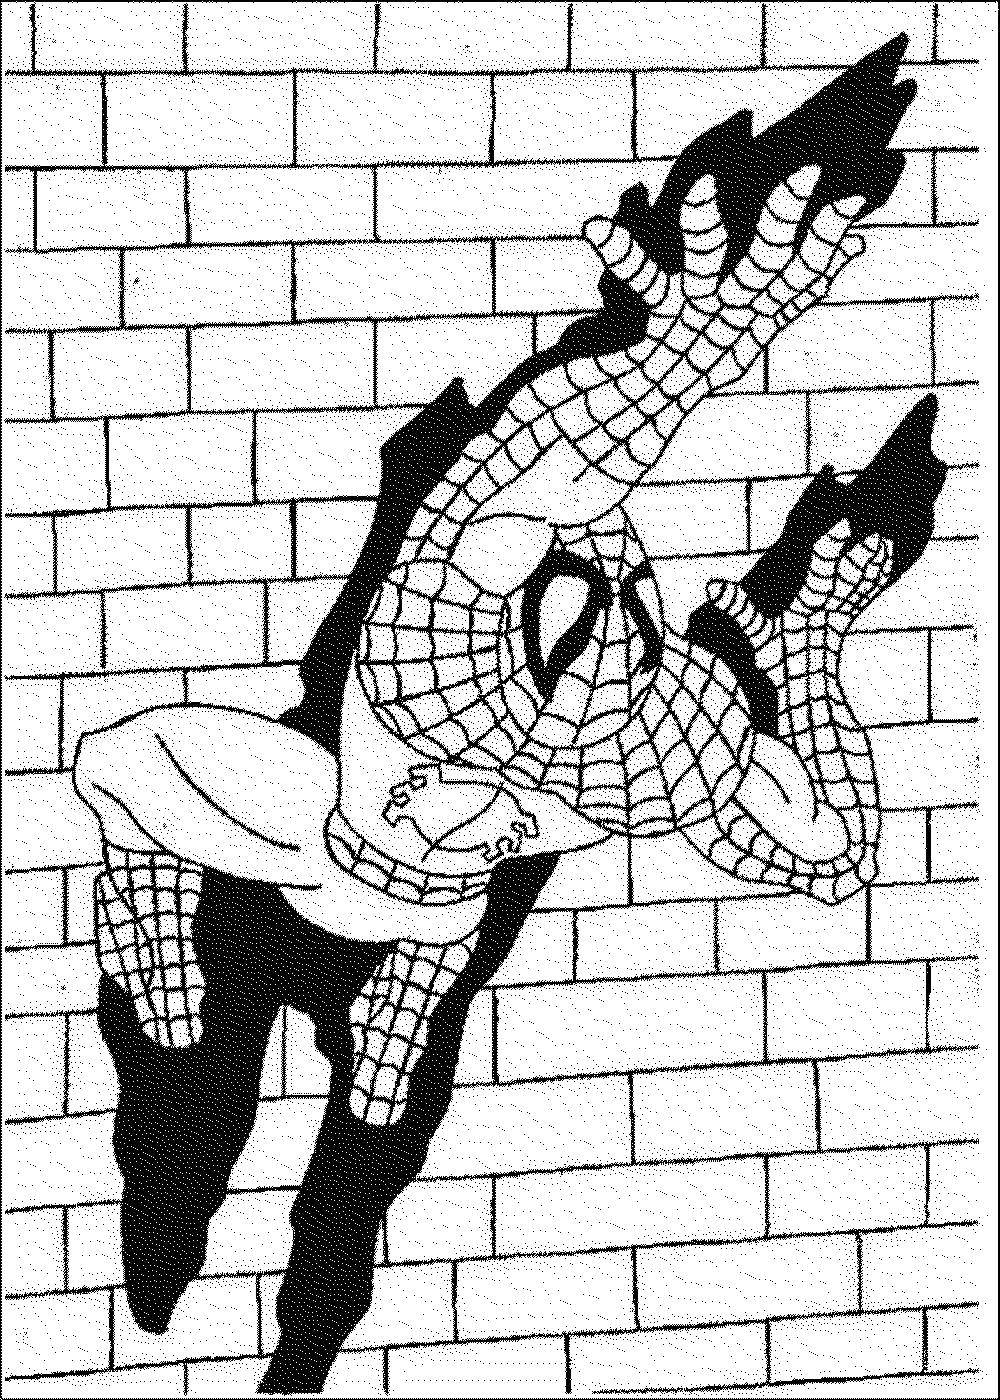 Coloring Spider-man crawling on a wall. Category Comics. Tags:  Comics, Spider-Man, Spider-Man.